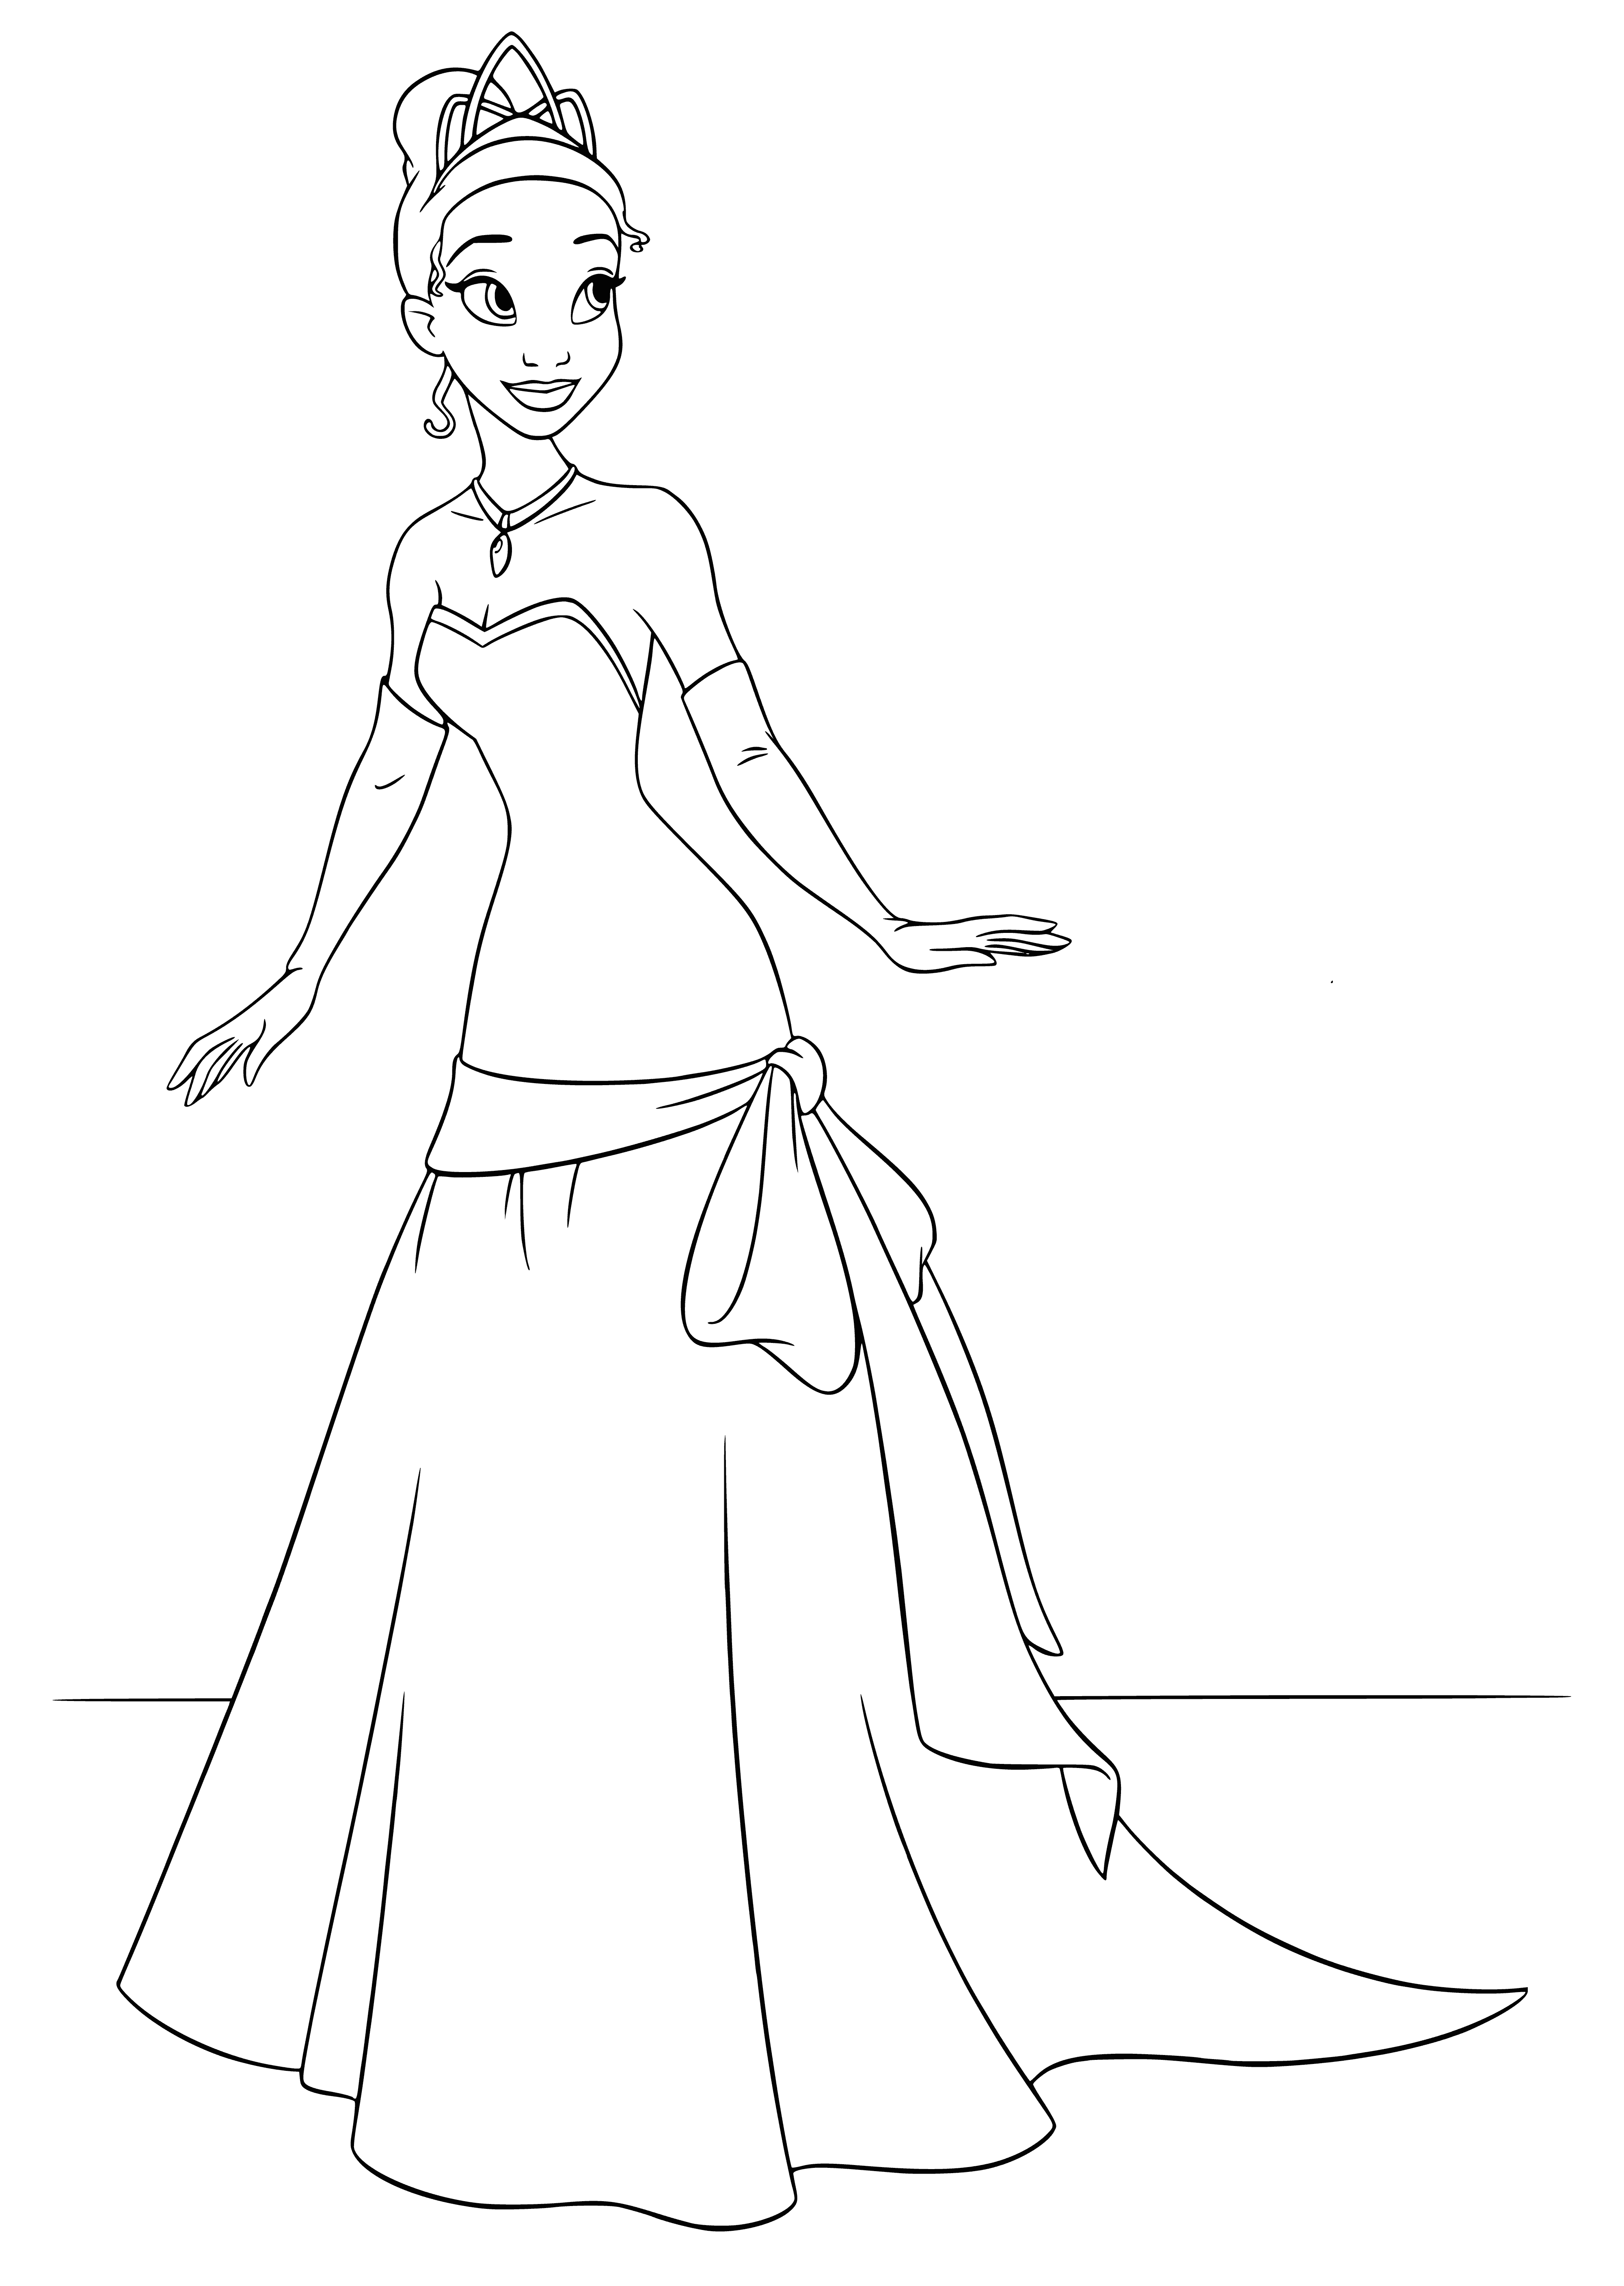 Tiana's new dress coloring page